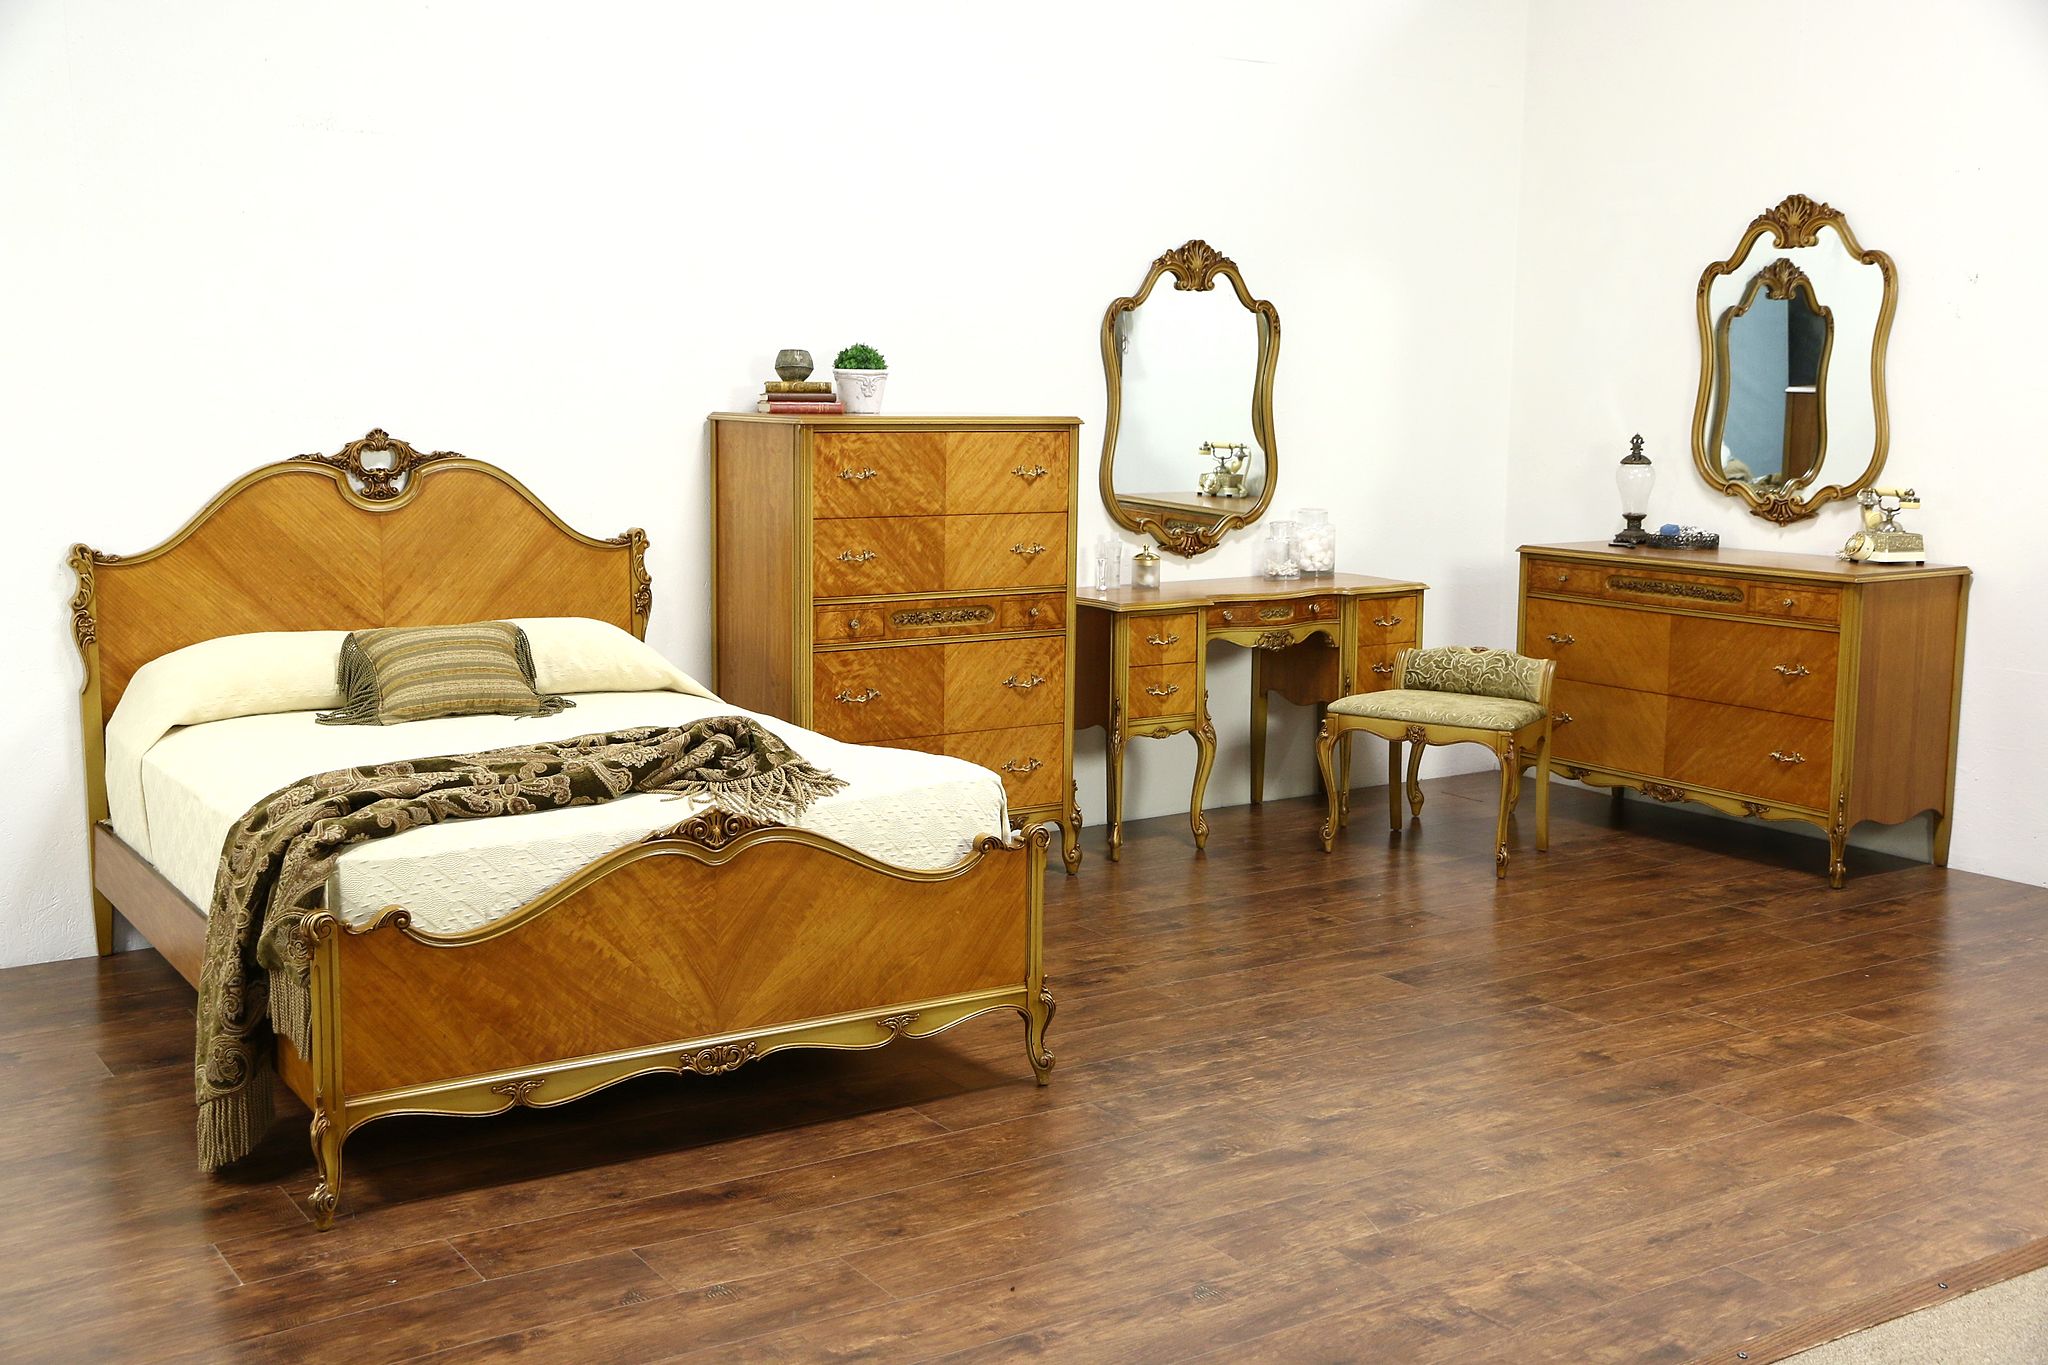 1940s bedroom furniture style with contemporary furniture